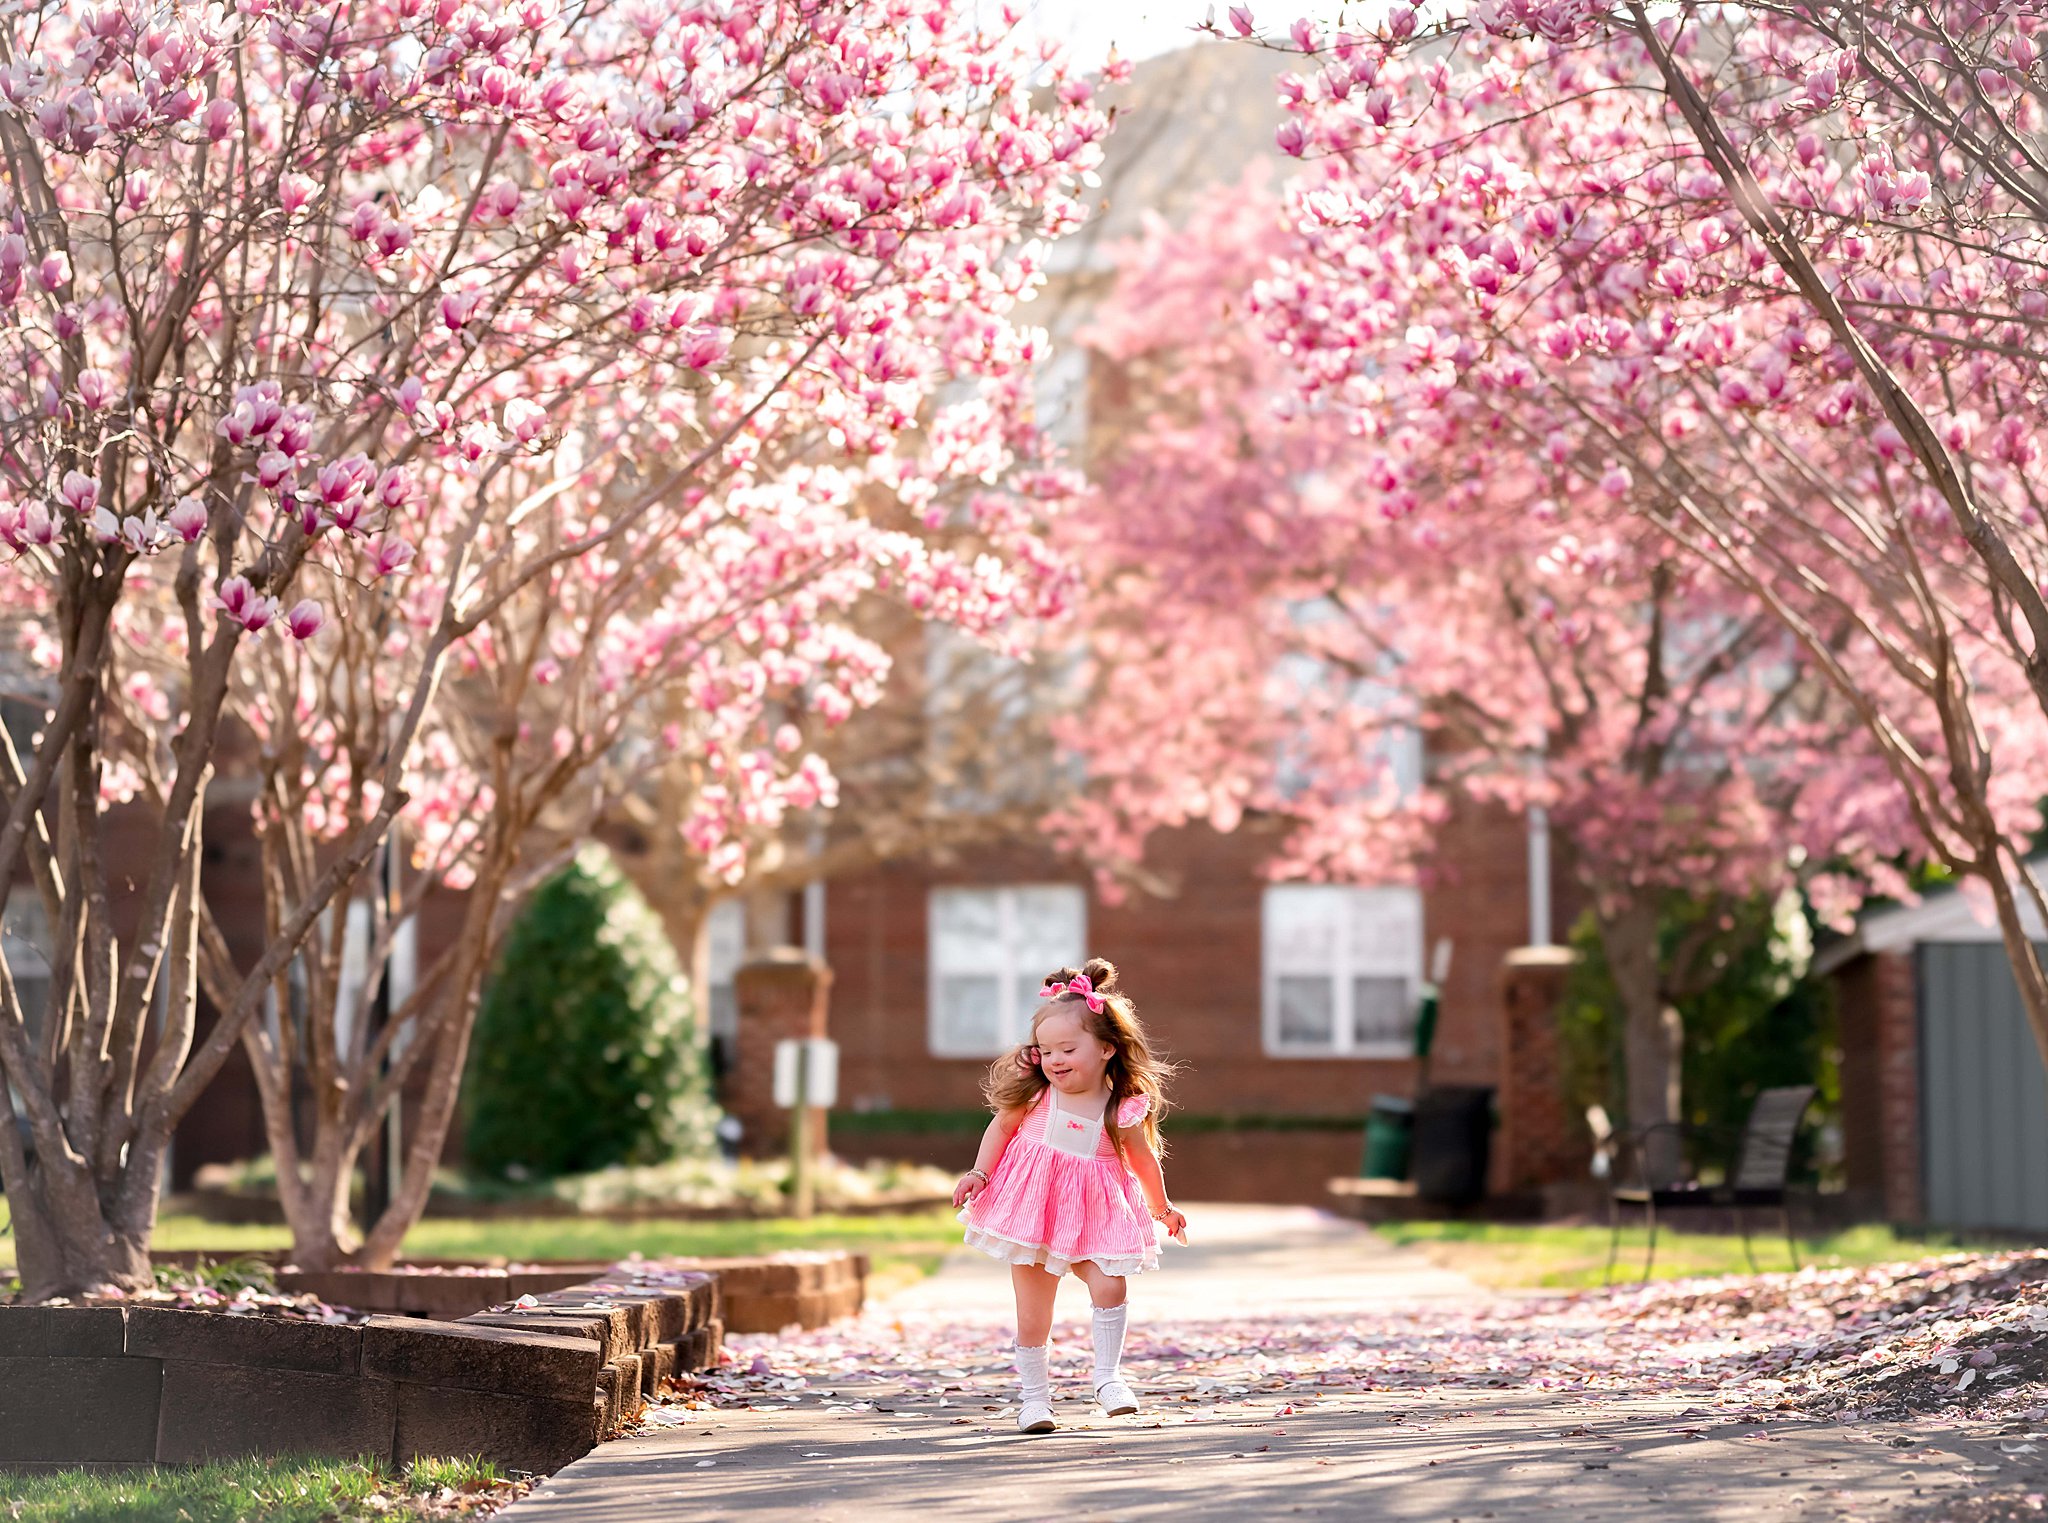 A young girl in a classic pink dress plays under the blooming pink flowers of trees Children’s Boutique Raleigh NC